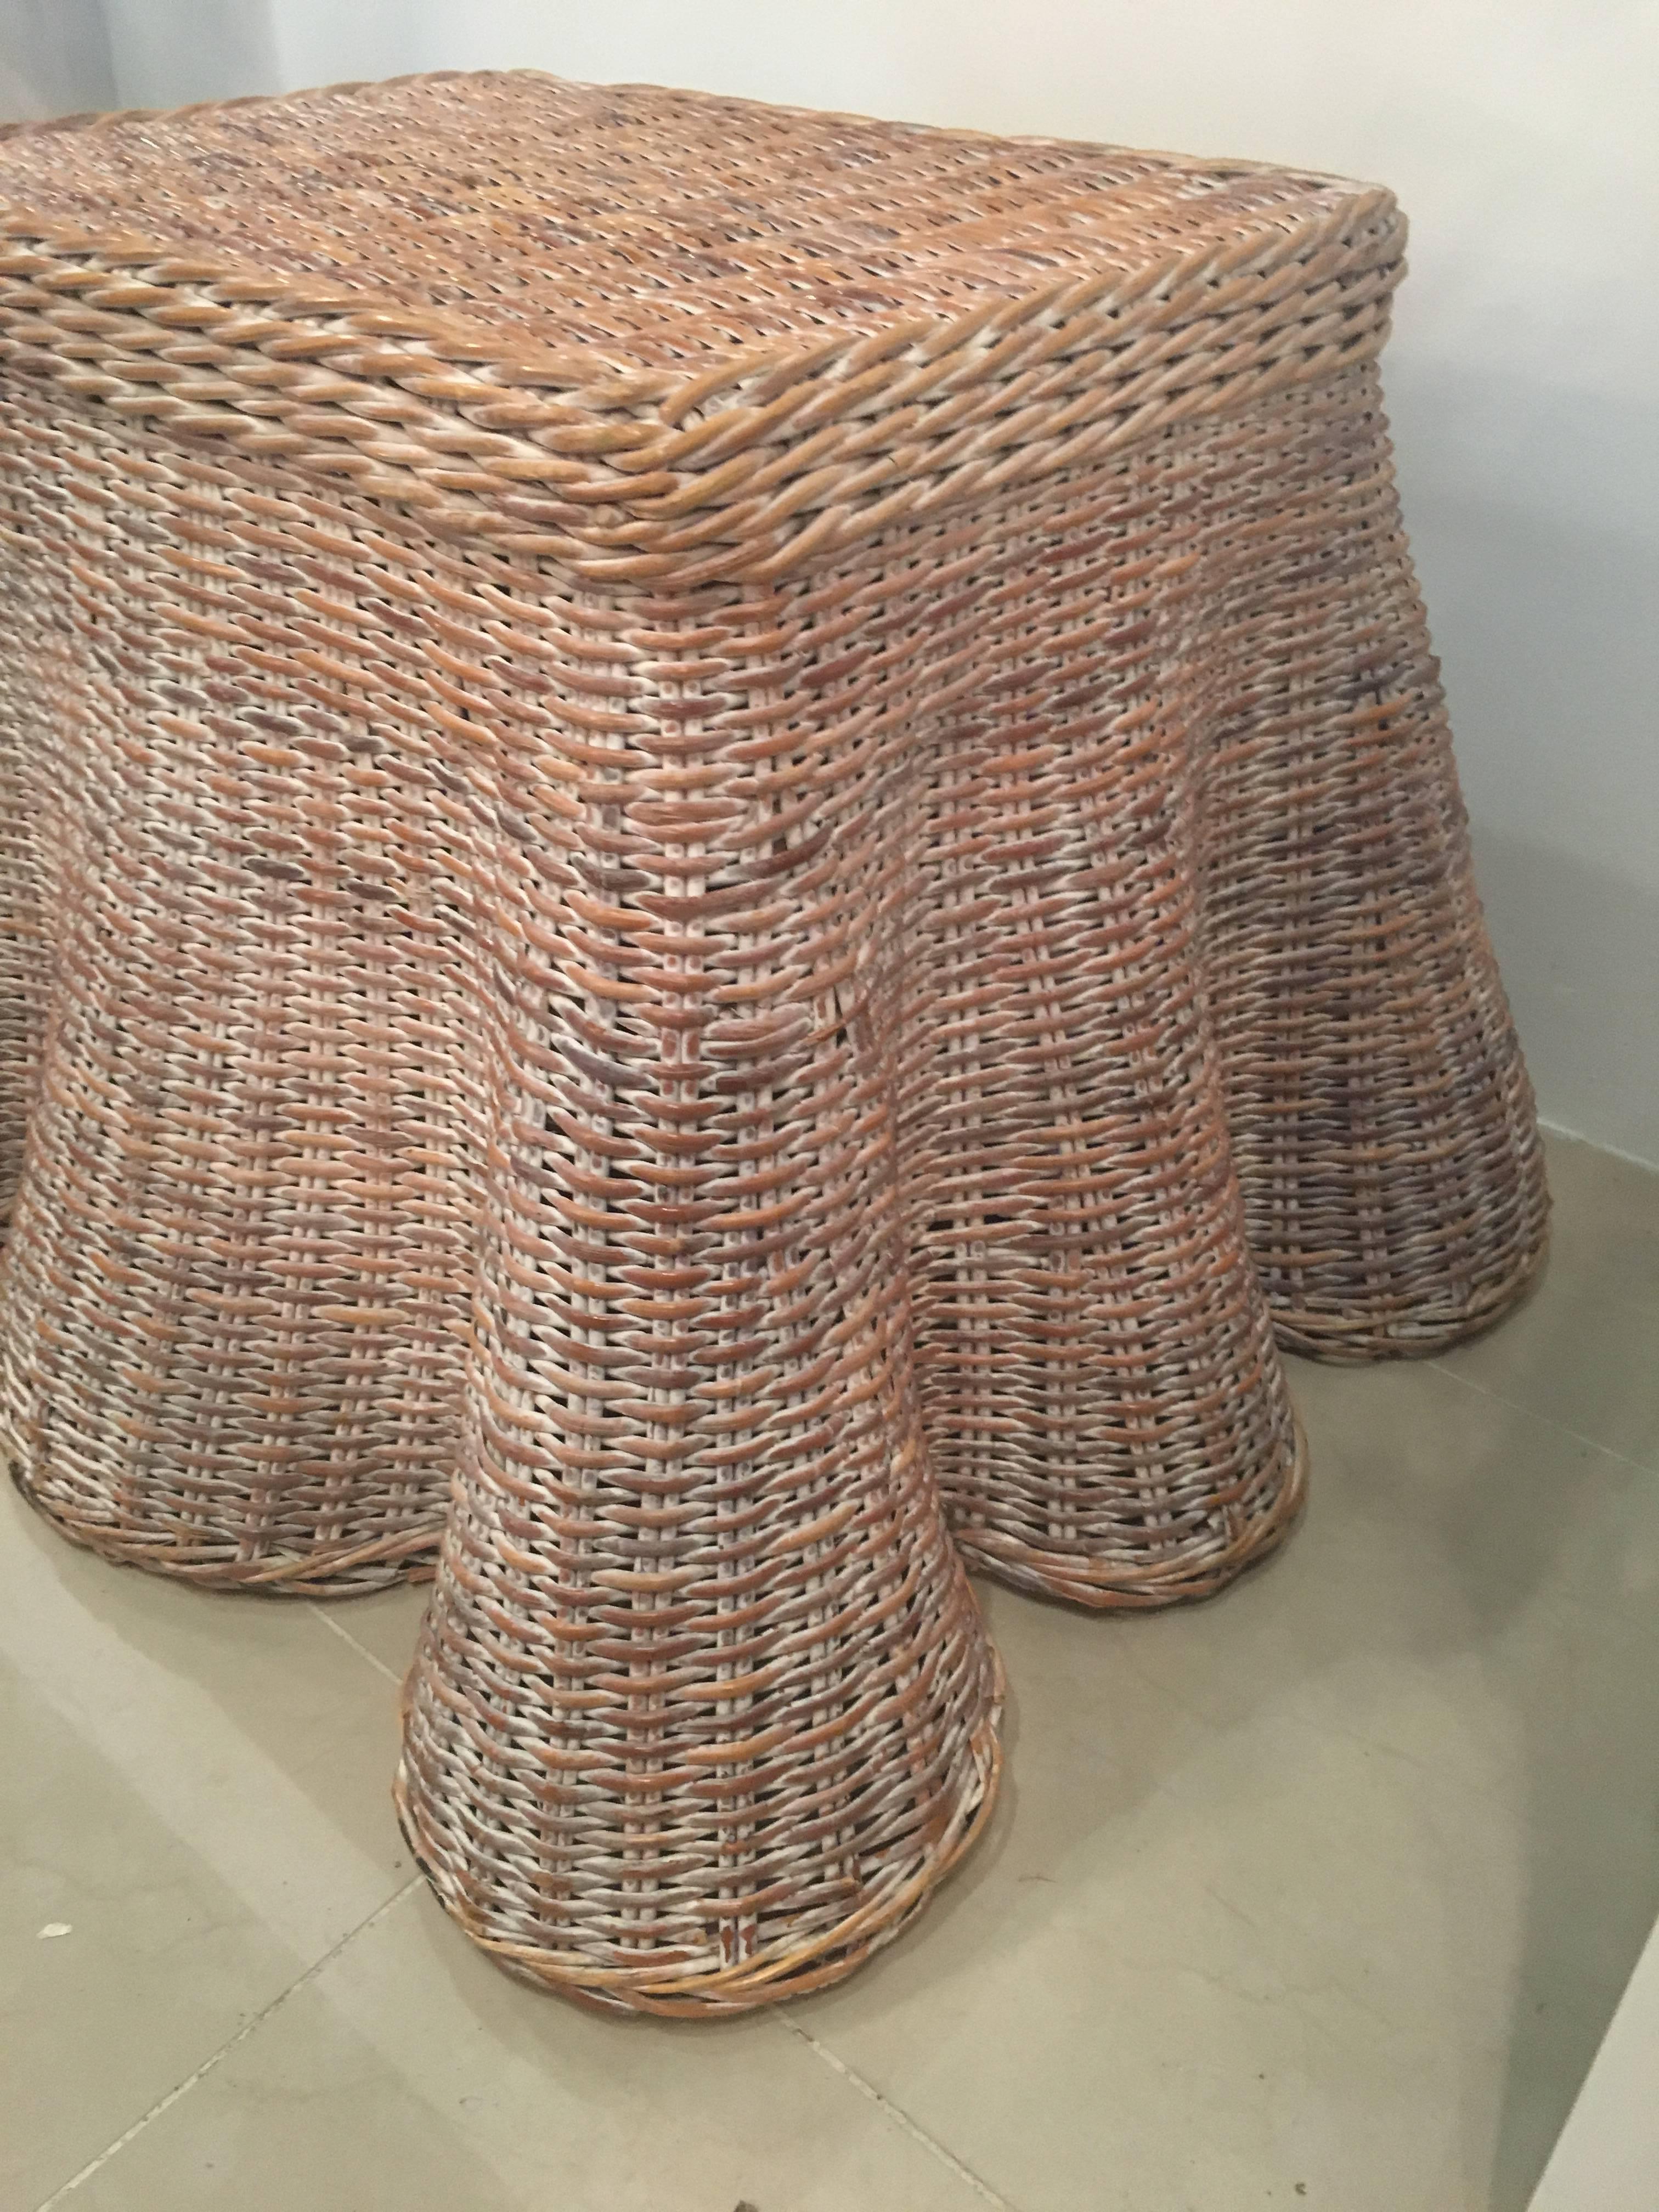 Vintage draped wicker table. This can be used as an end or side table or coffee, cocktail table. Please see dimensions to see which works for your space. I do have two more of these in different variations of wicker color. If you plan on having